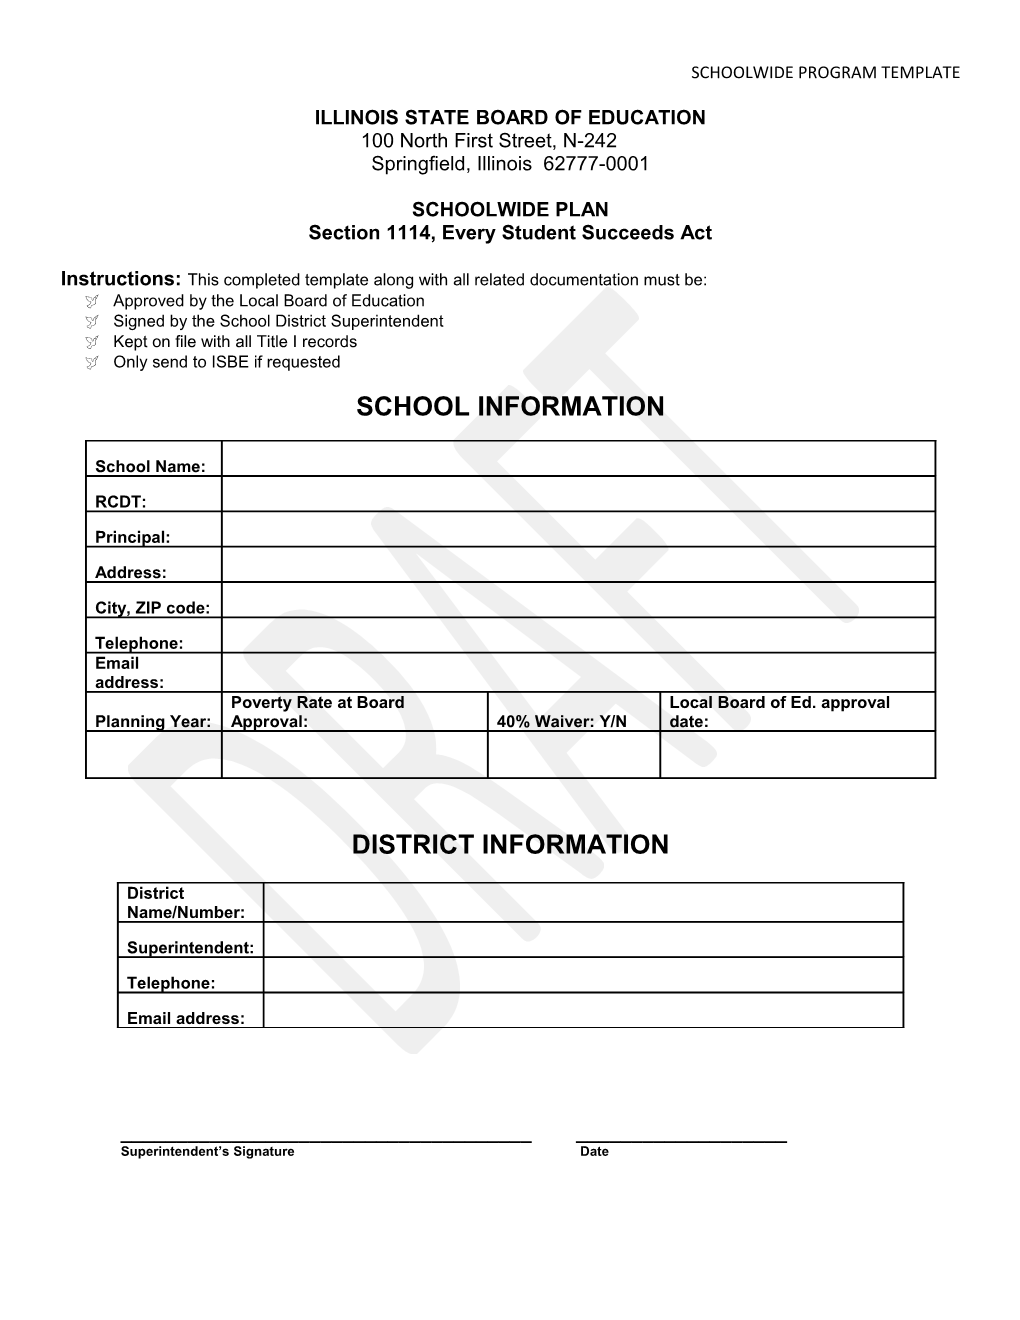 SCHOOLWIDE PLAN Template